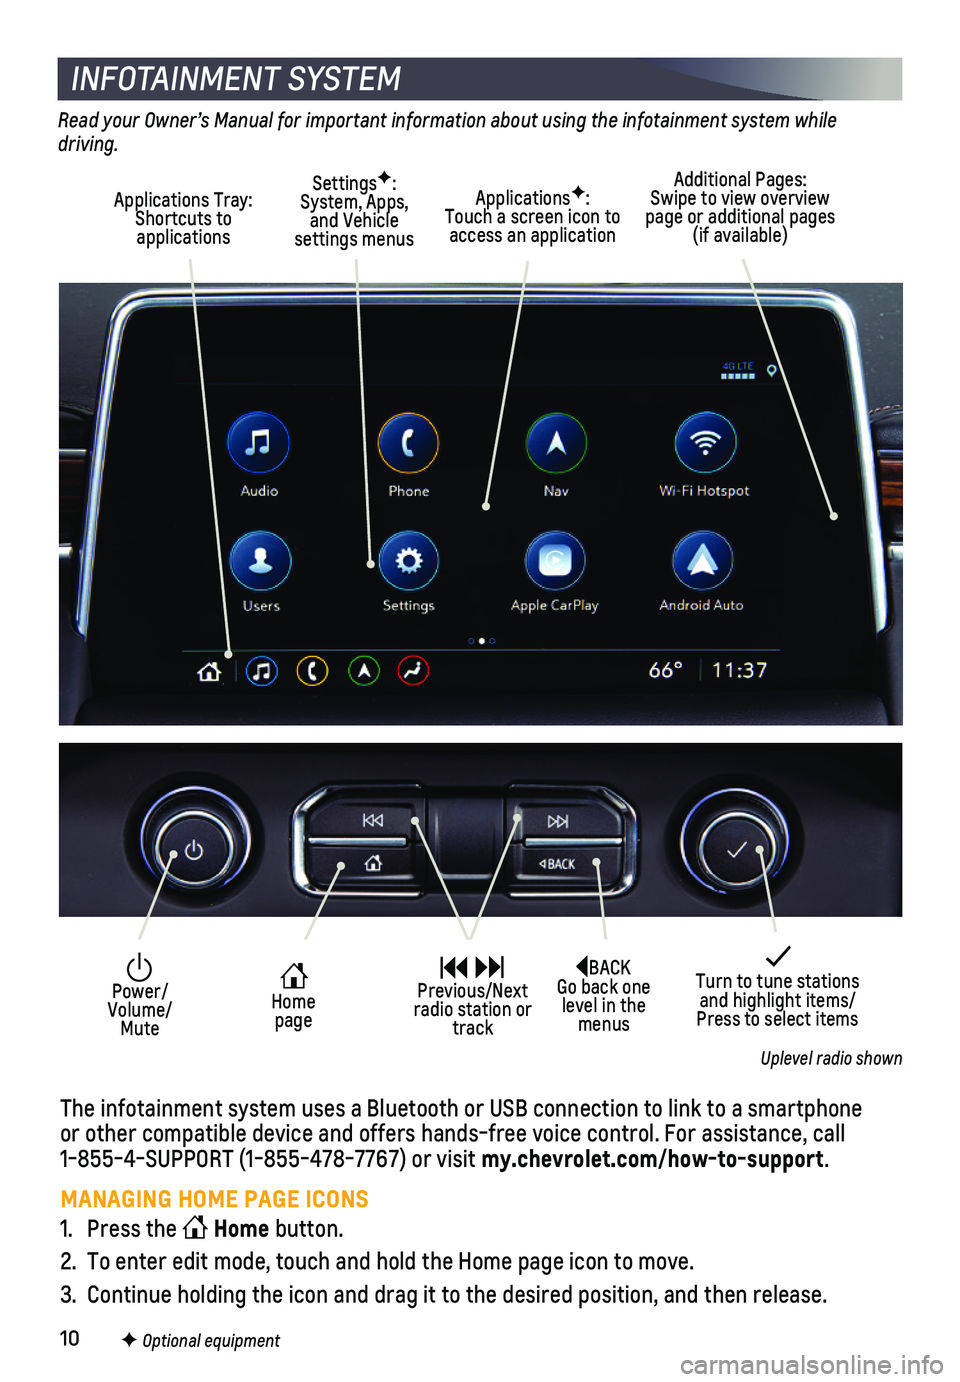 CHEVROLET SUBURBAN 2021  Get To Know Guide 10F Optional equipment
INFOTAINMENT SYSTEM
Read your Owner’s Manual for important information about using the infotainment system while driving. 
Additional Pages: Swipe to view overview page or add